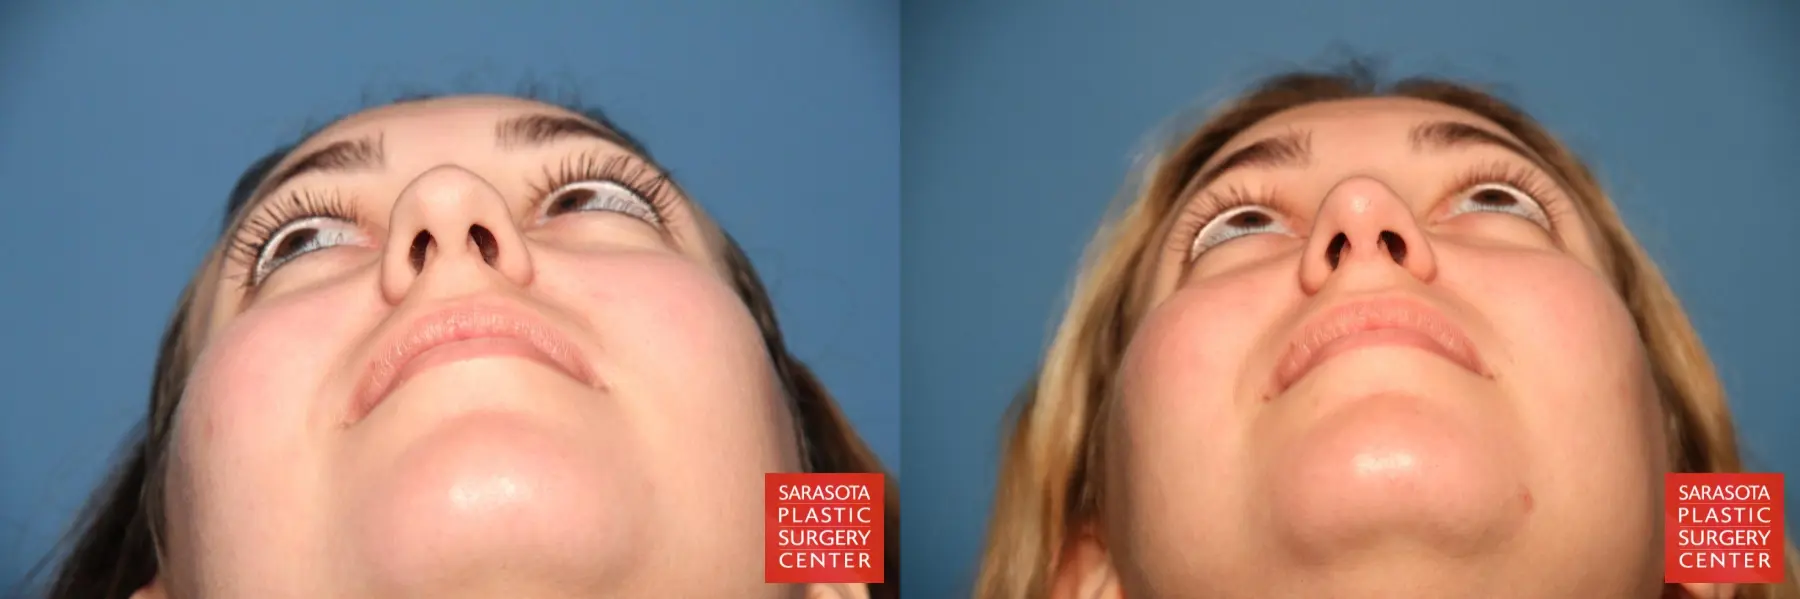 Rhinoplasty: Patient 2 - Before and After 6